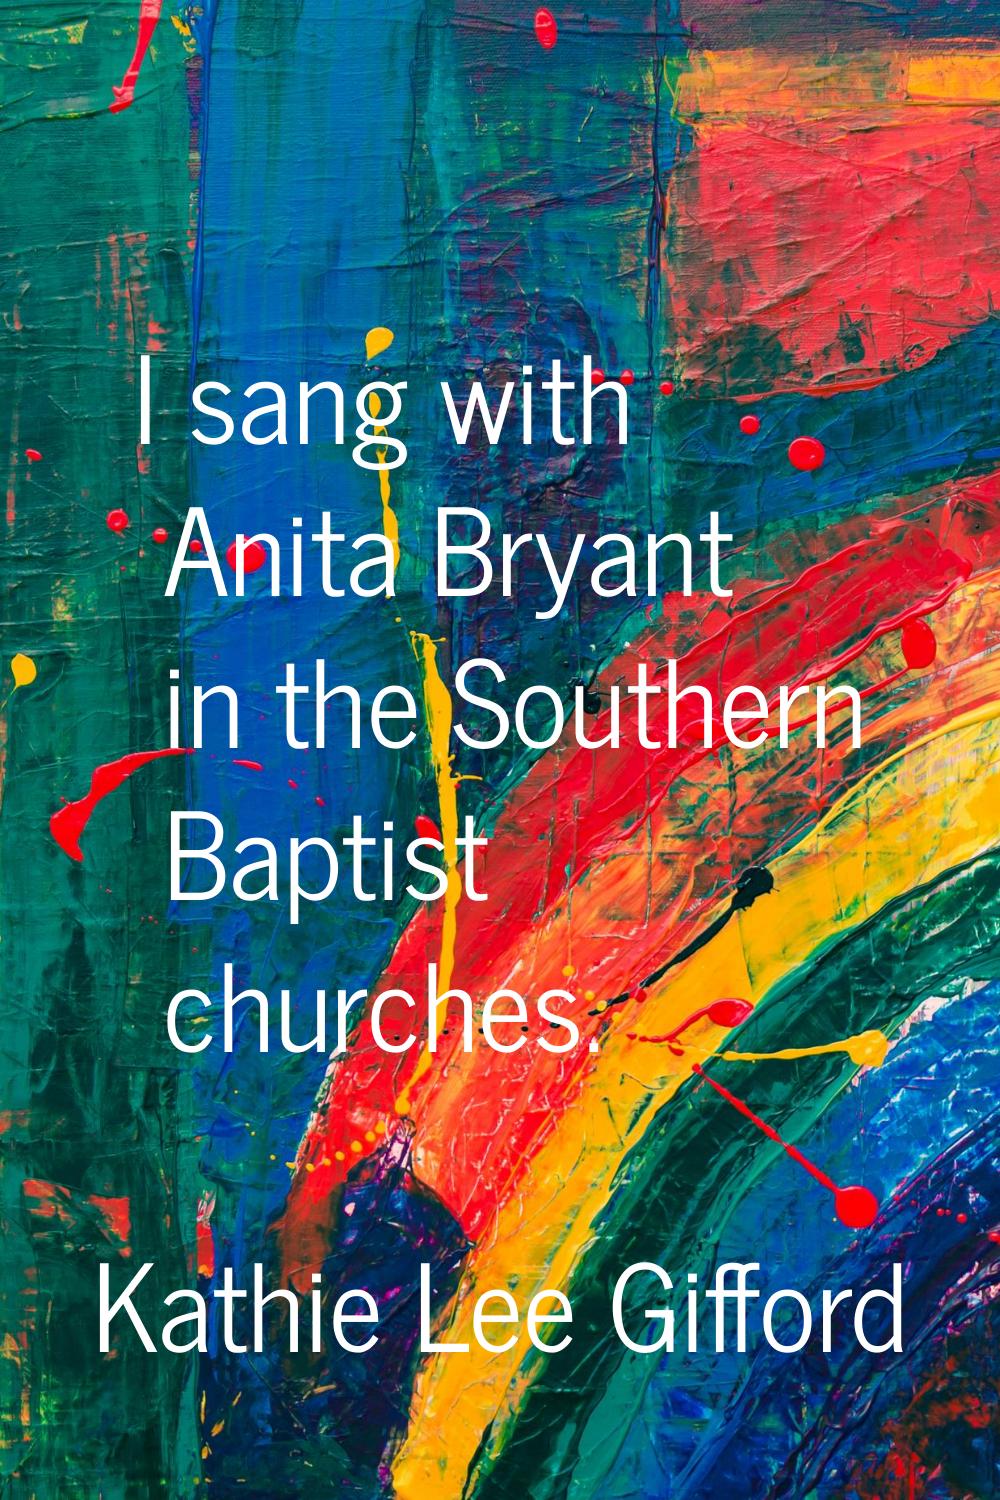 I sang with Anita Bryant in the Southern Baptist churches.